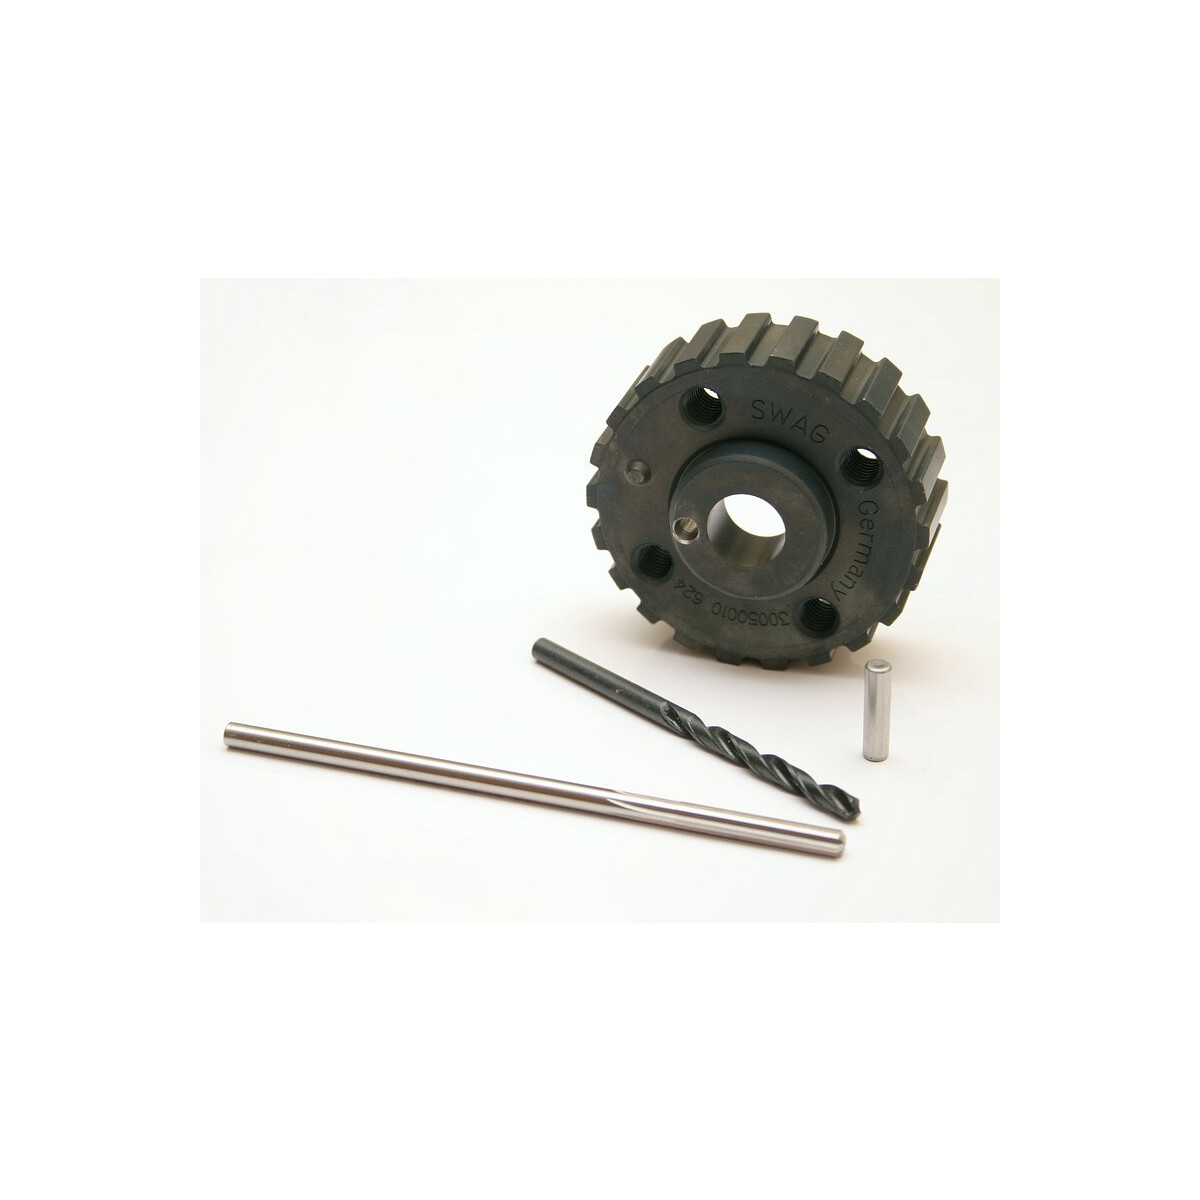 High Torque Kit for Polo G40 until year 10/1990 (motorcode PY 002 177) - Enhanced pulley / timing belt mounting on the crankshaft PY 002 177 (til 10.1990)